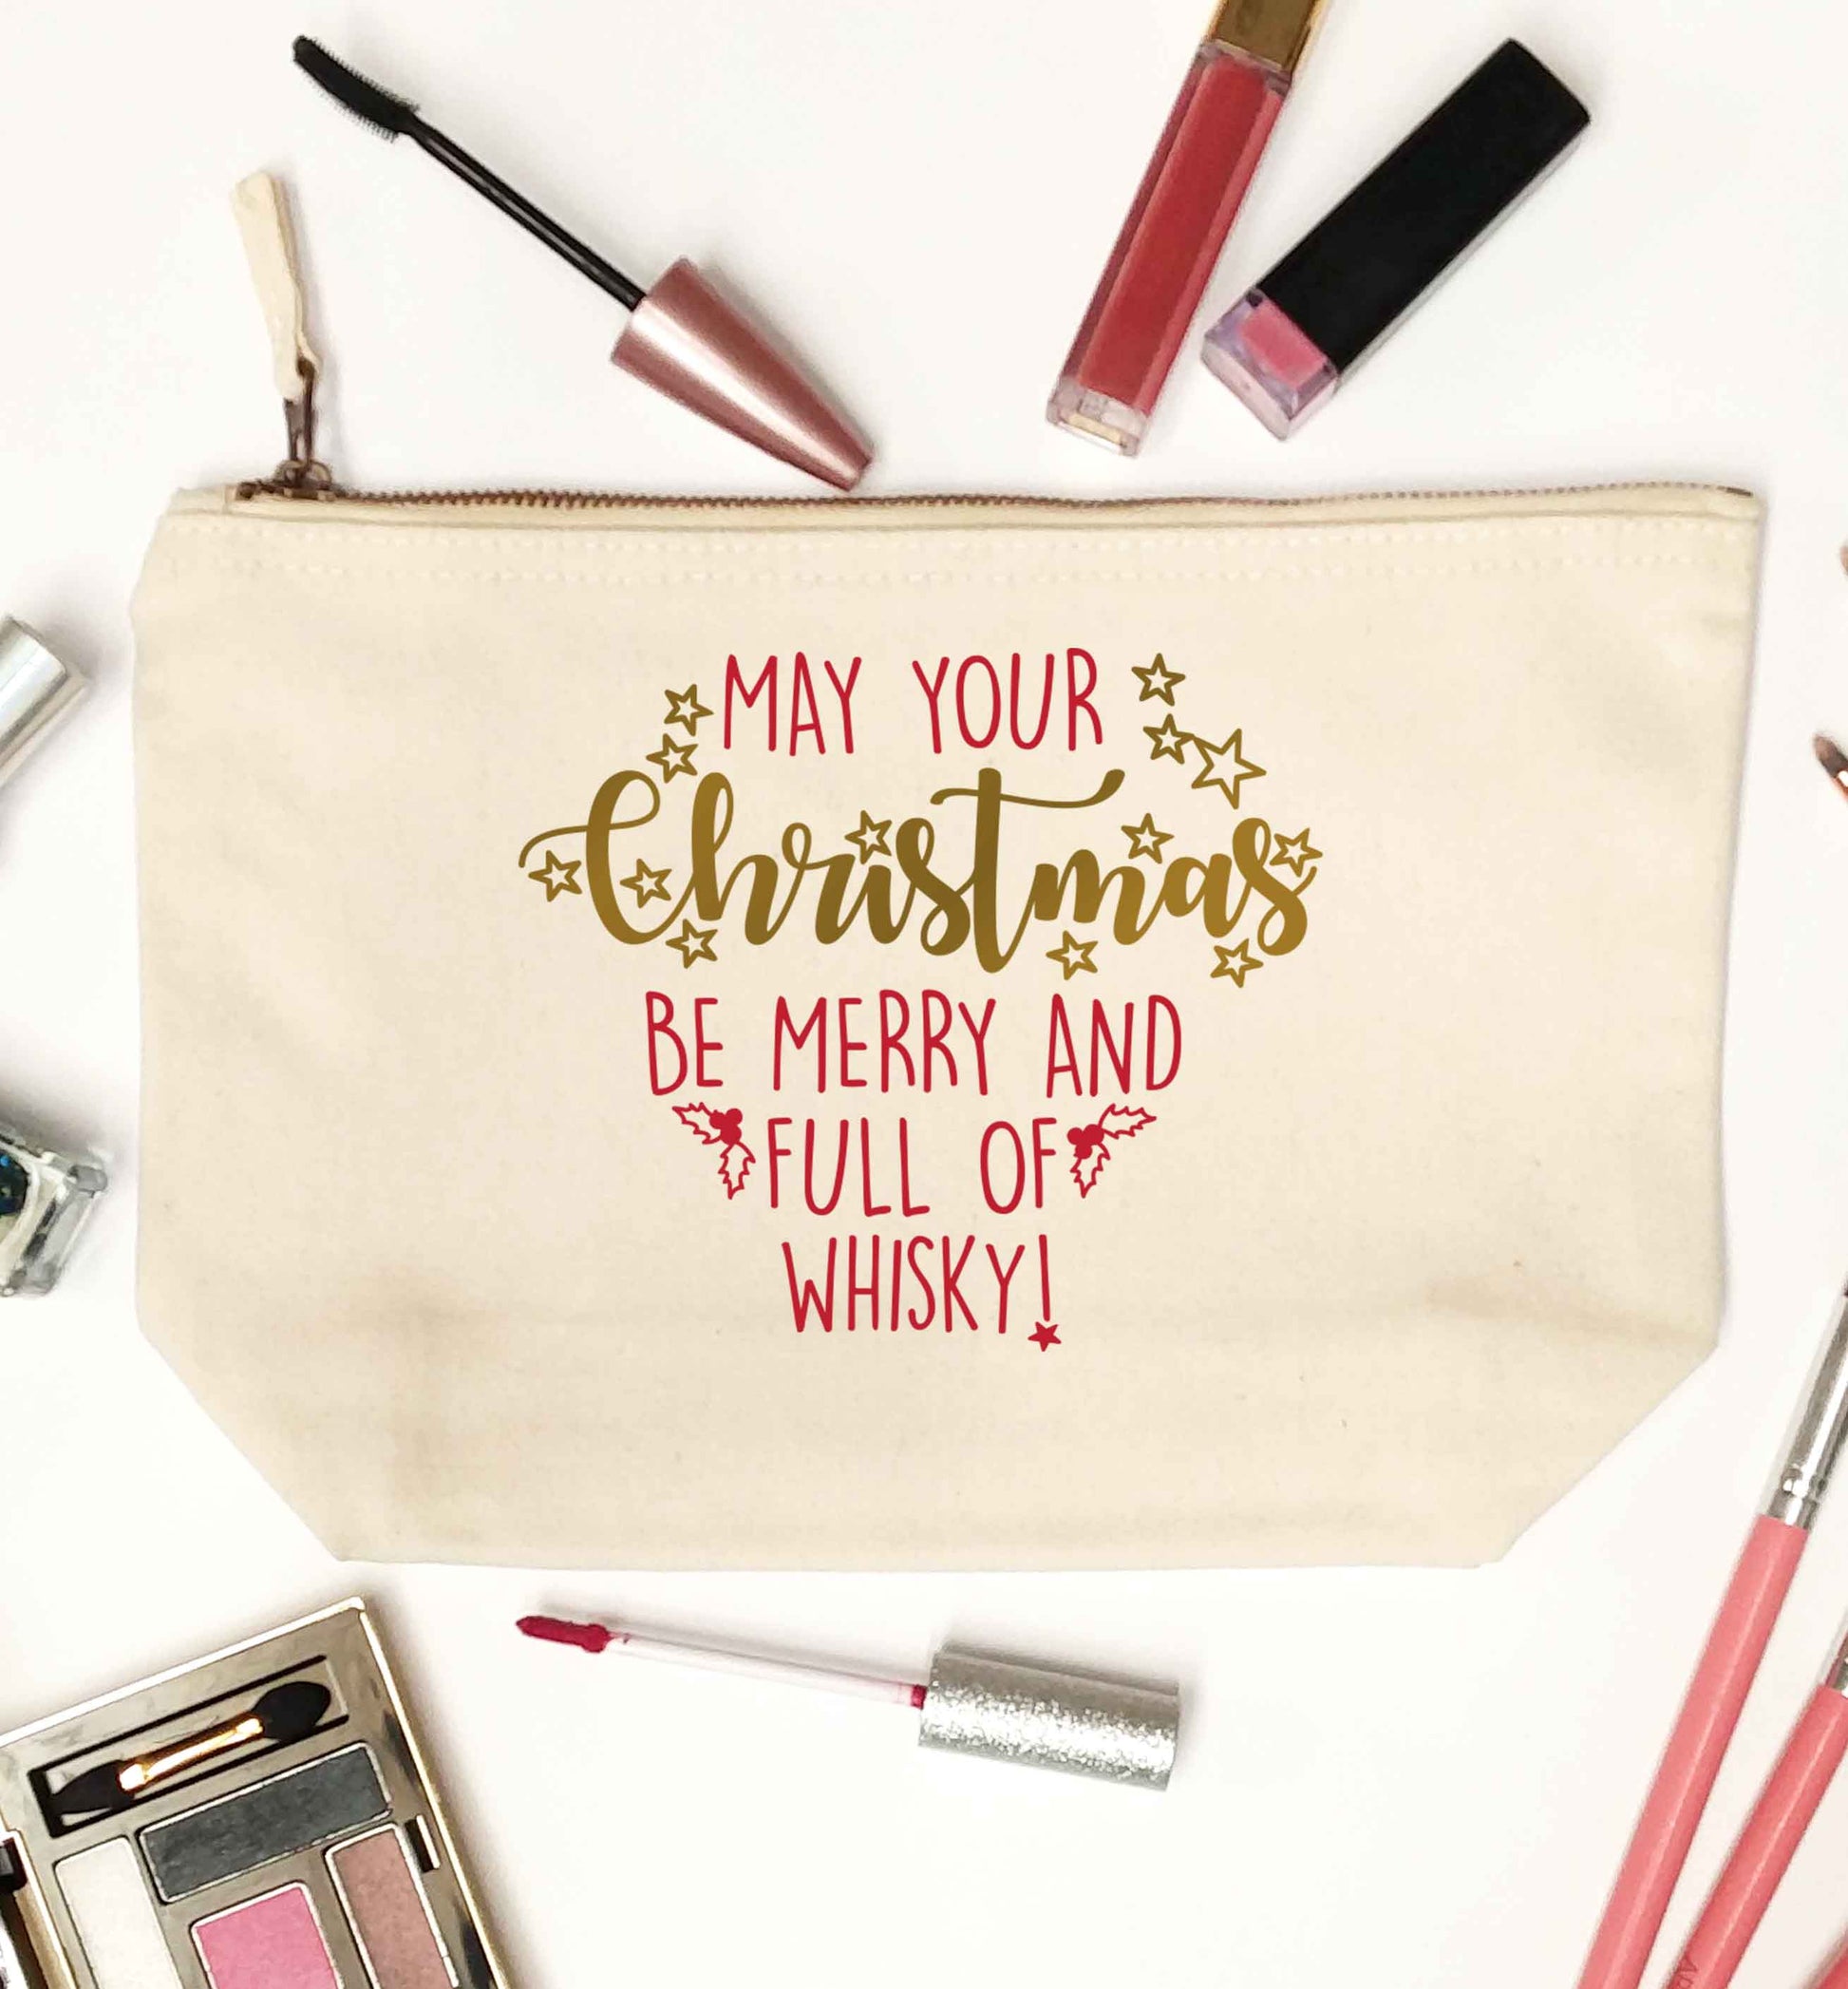 May your Christmas be merry and full of whisky natural makeup bag